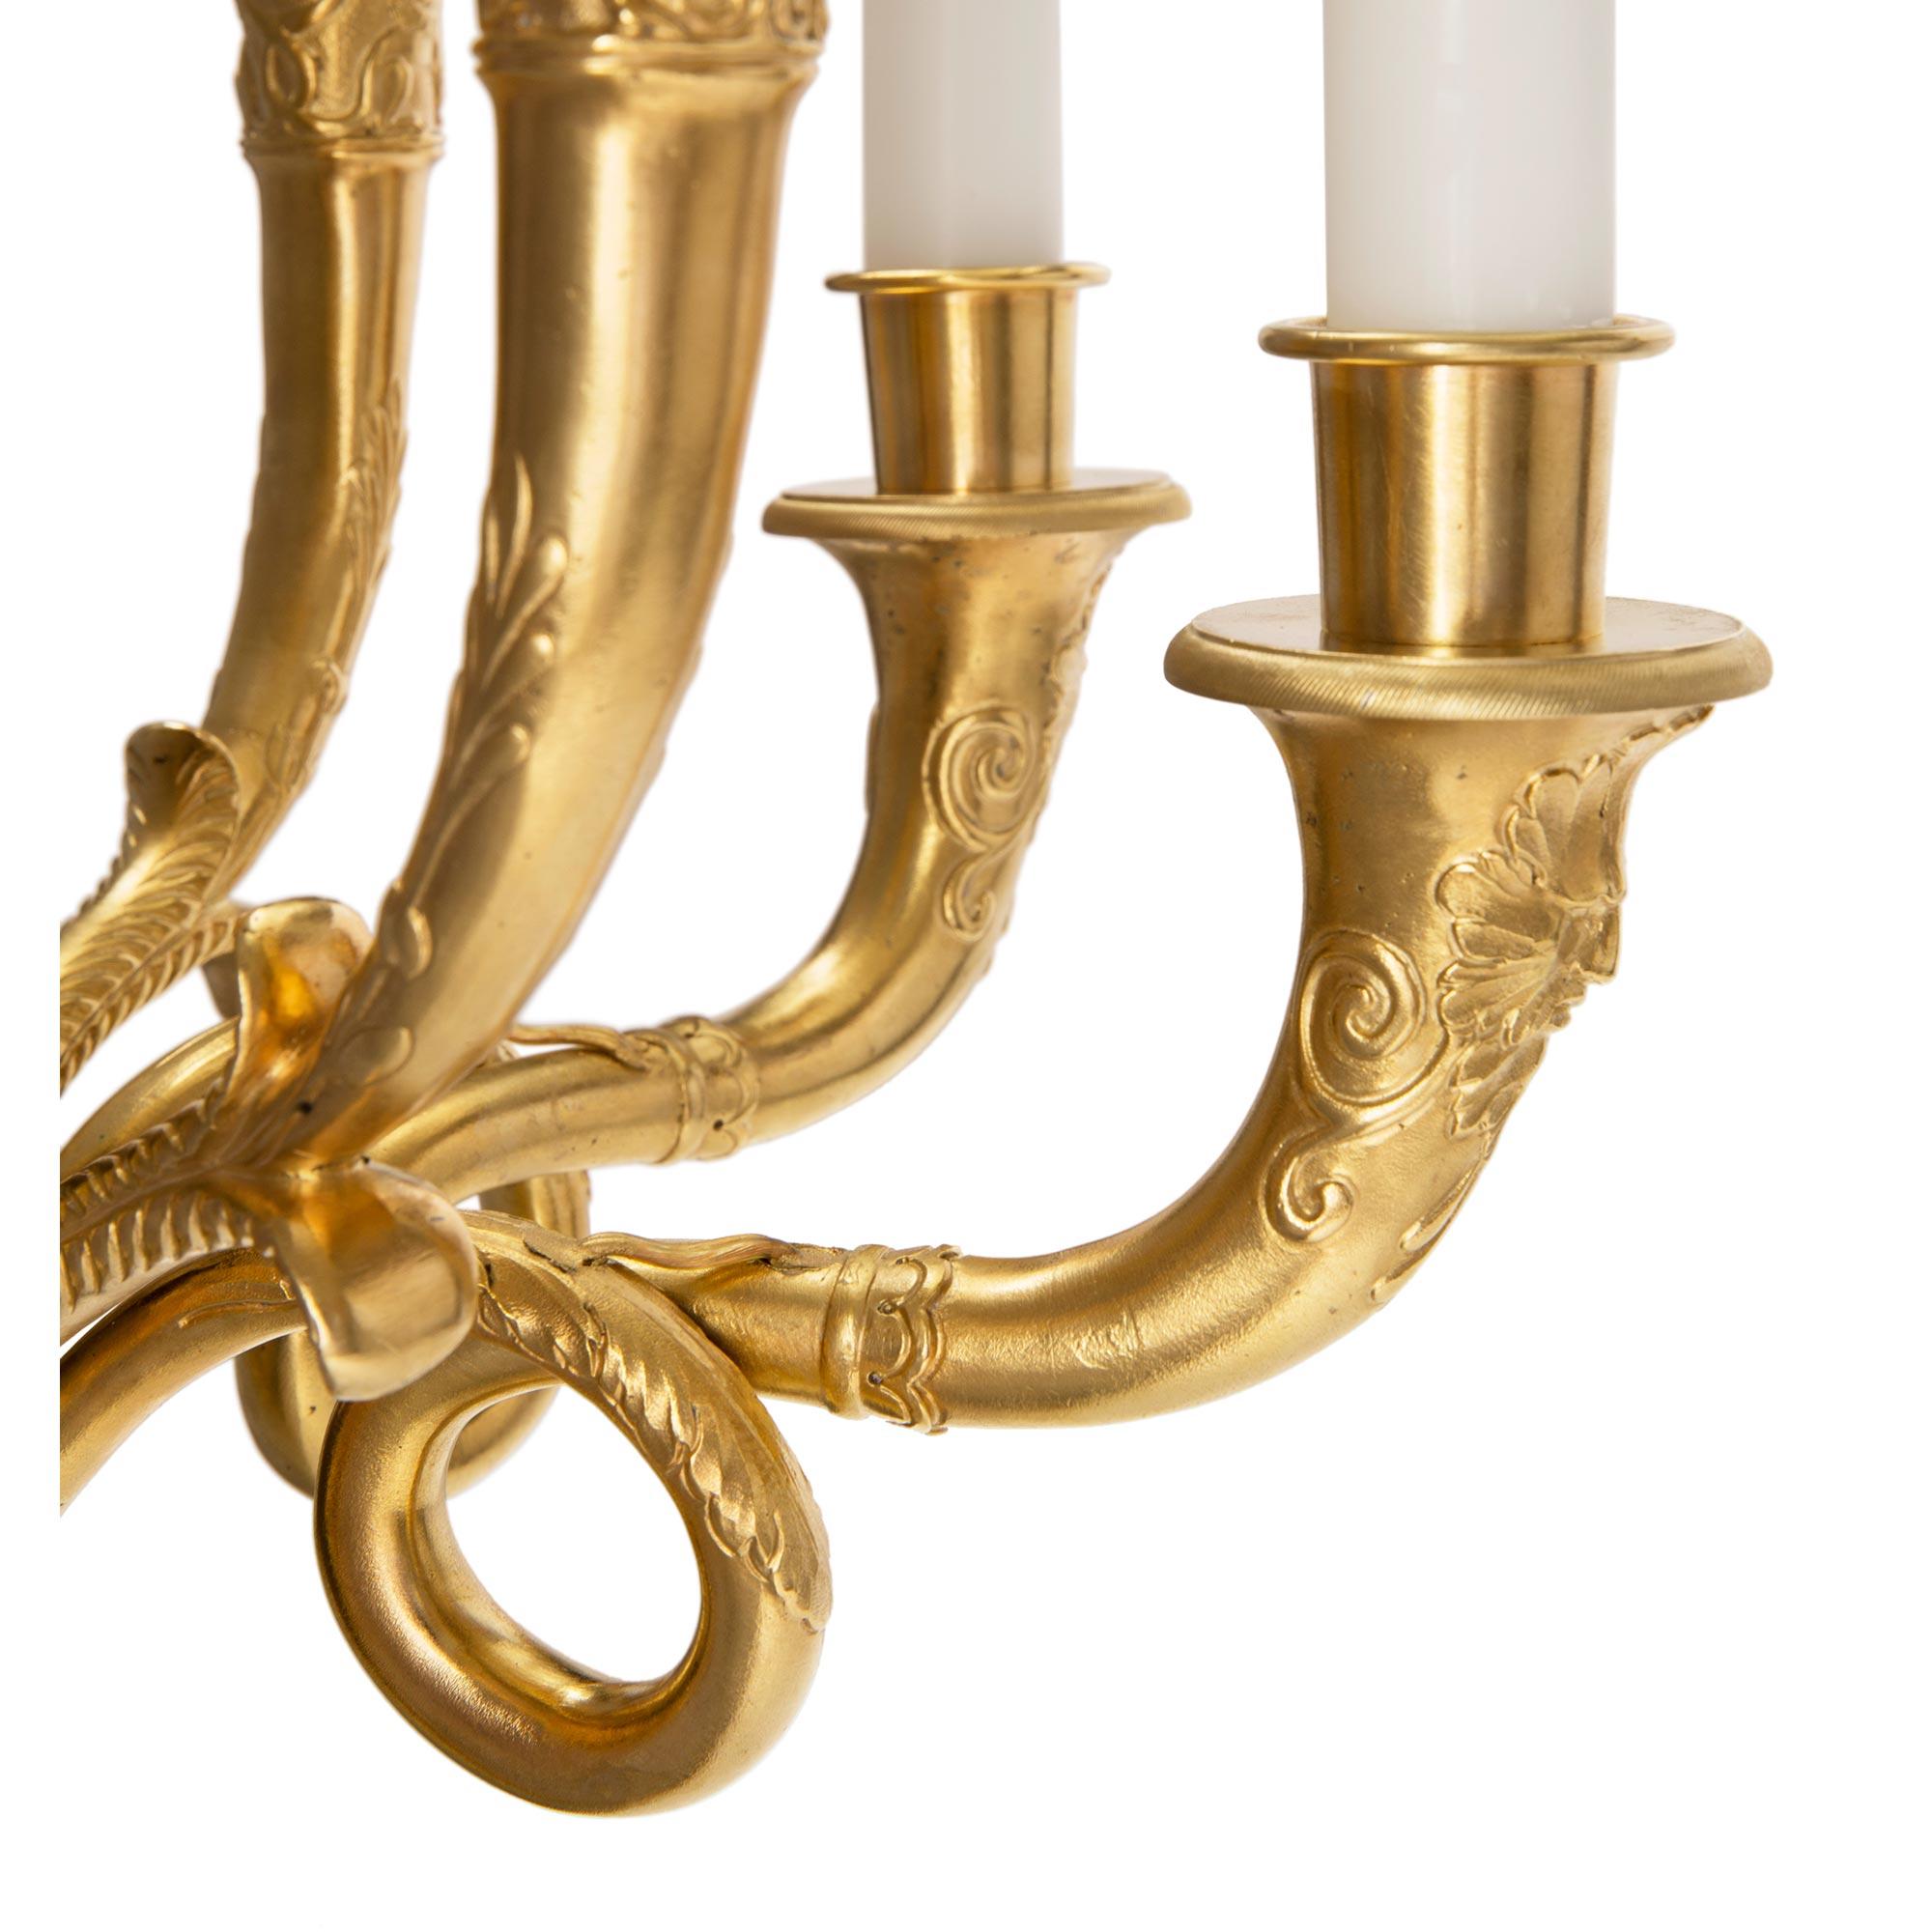 Pair of French 19th Century Neoclassical St. Bronze and Ormolu Sconces For Sale 1